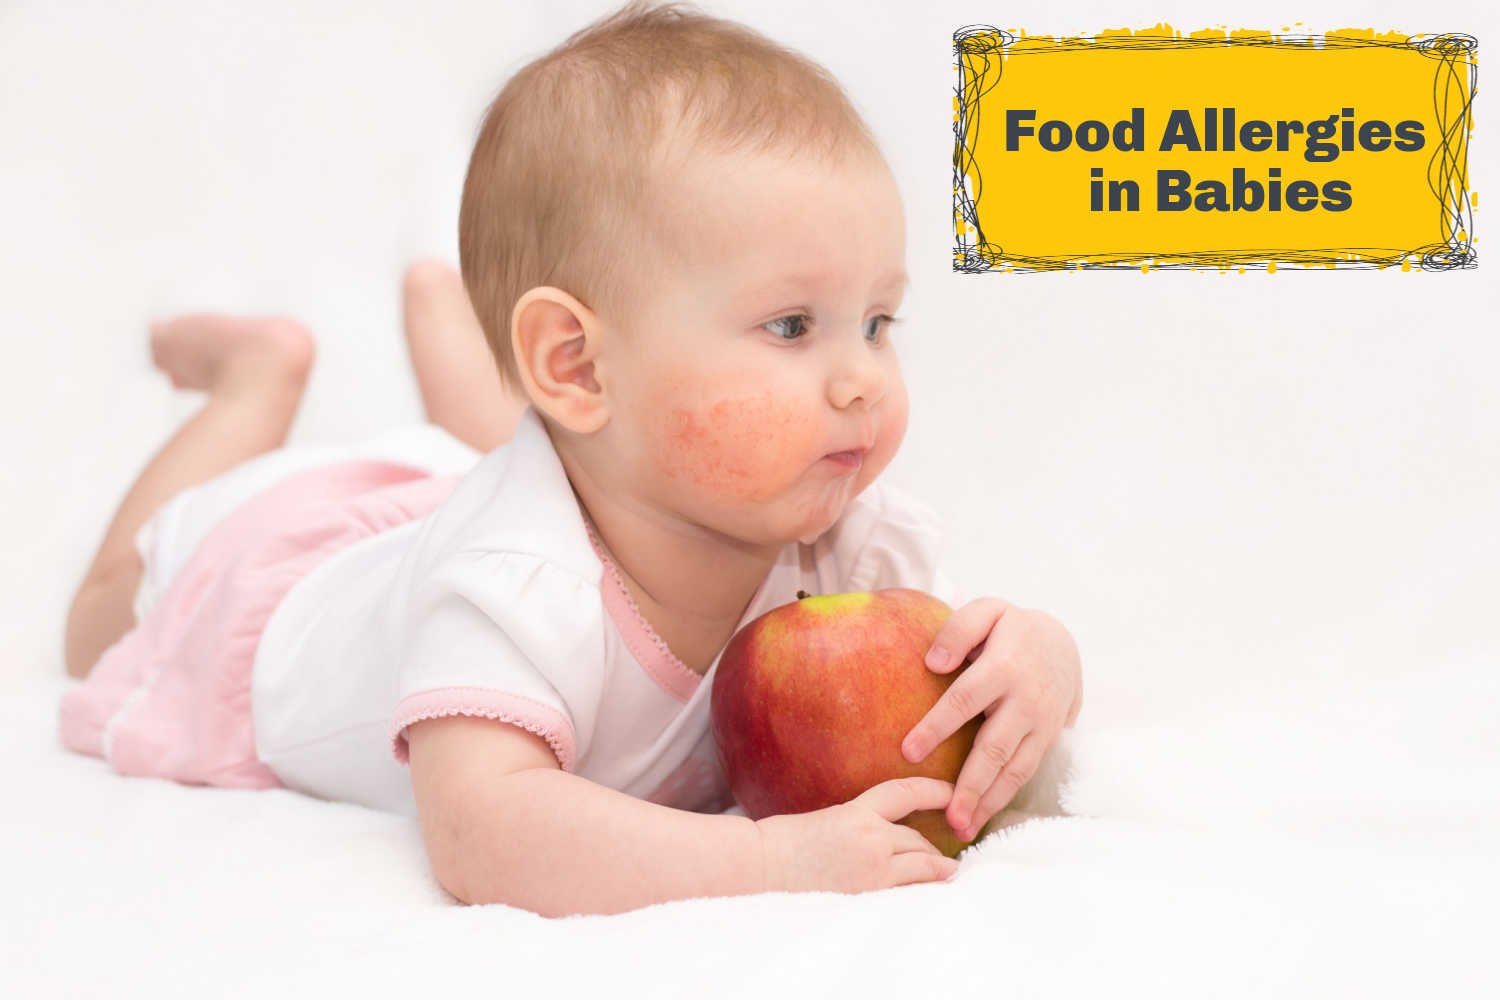 Food Allergies in Babies- Signs, Preventive Measures and Treatment